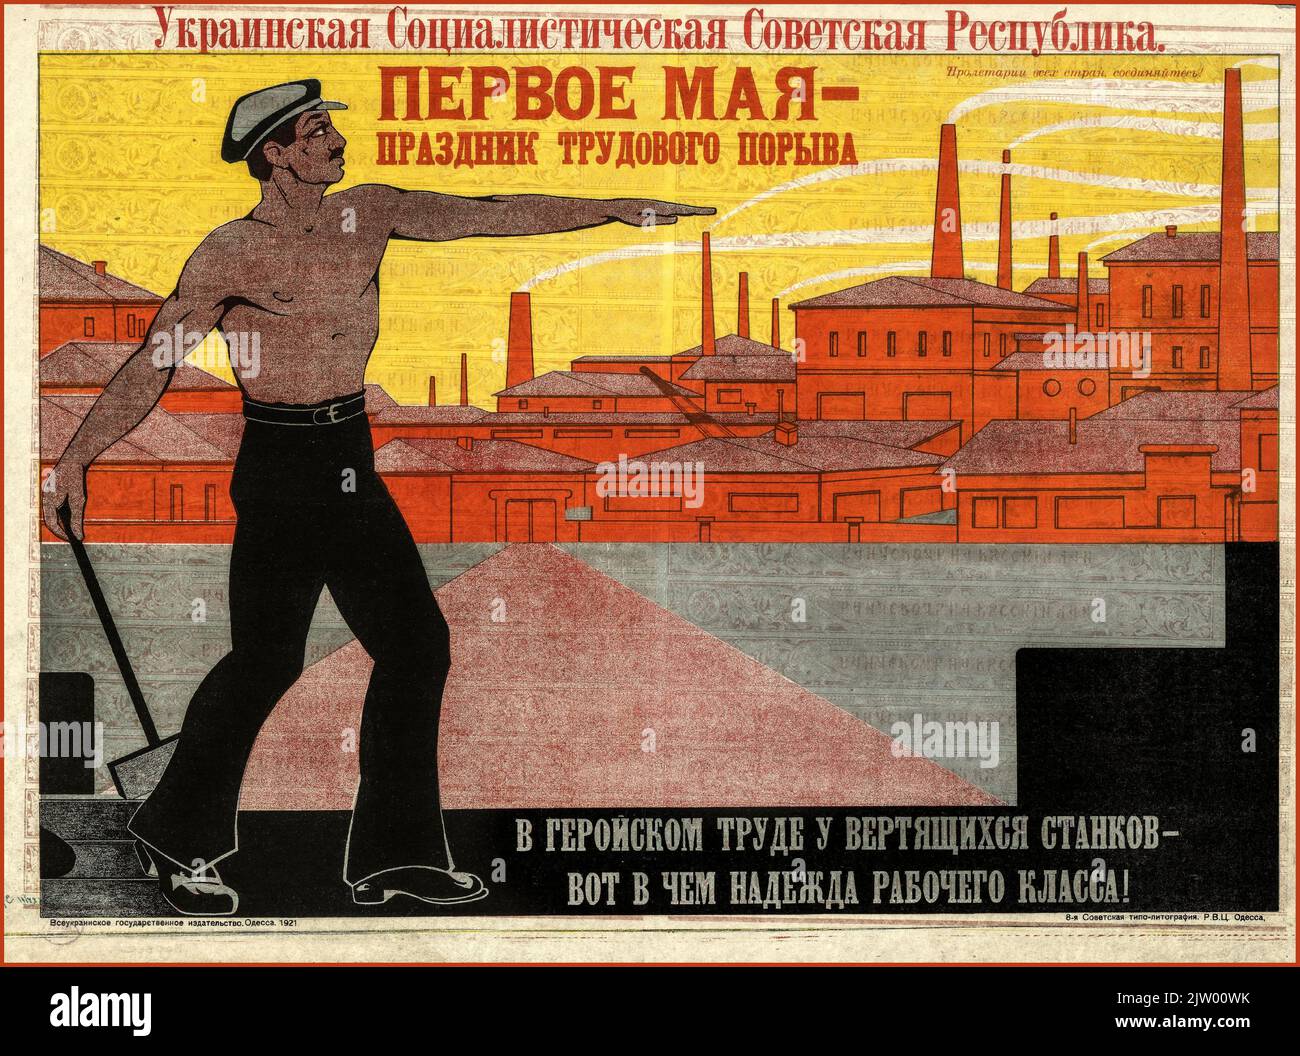 UKRAINE Propaganda Poster 1st May The first of May is a holiday of labor workers. Heroic labor with revolving machine-tools— the hope of the working class! : [poster]. - Odessa: All-Ukrainian State Publishing House, [1921] (Odessa: 8th Soviet typolithography). — Color lithograph,  Ukrainian or Ukrainian SSR work Stock Photo